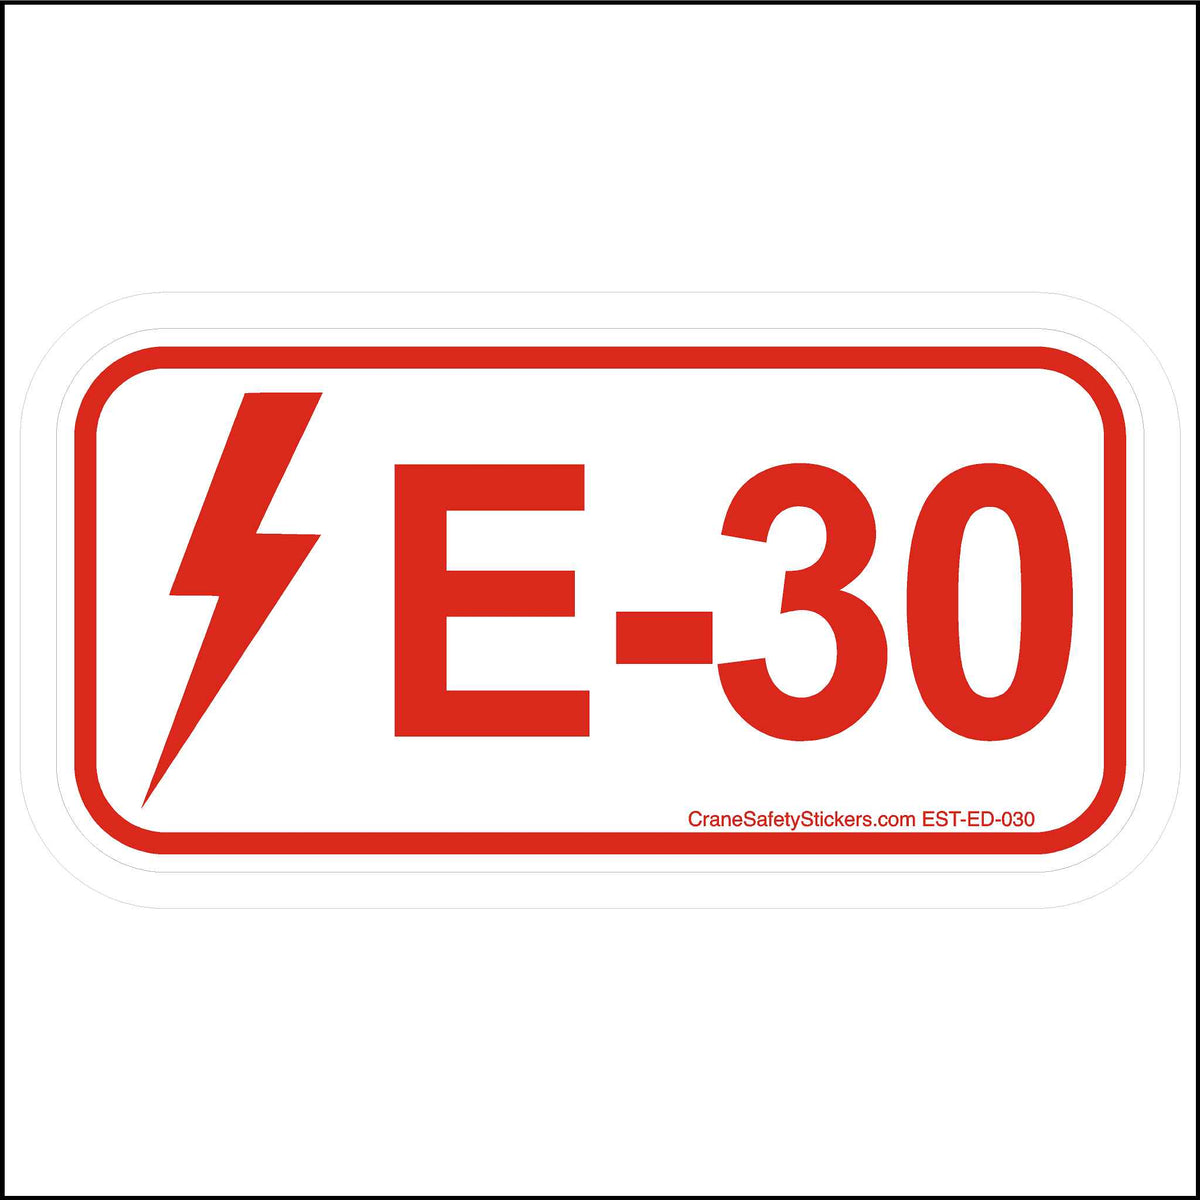 Energy Control Program Electrical Disconnect Stickers E-30.